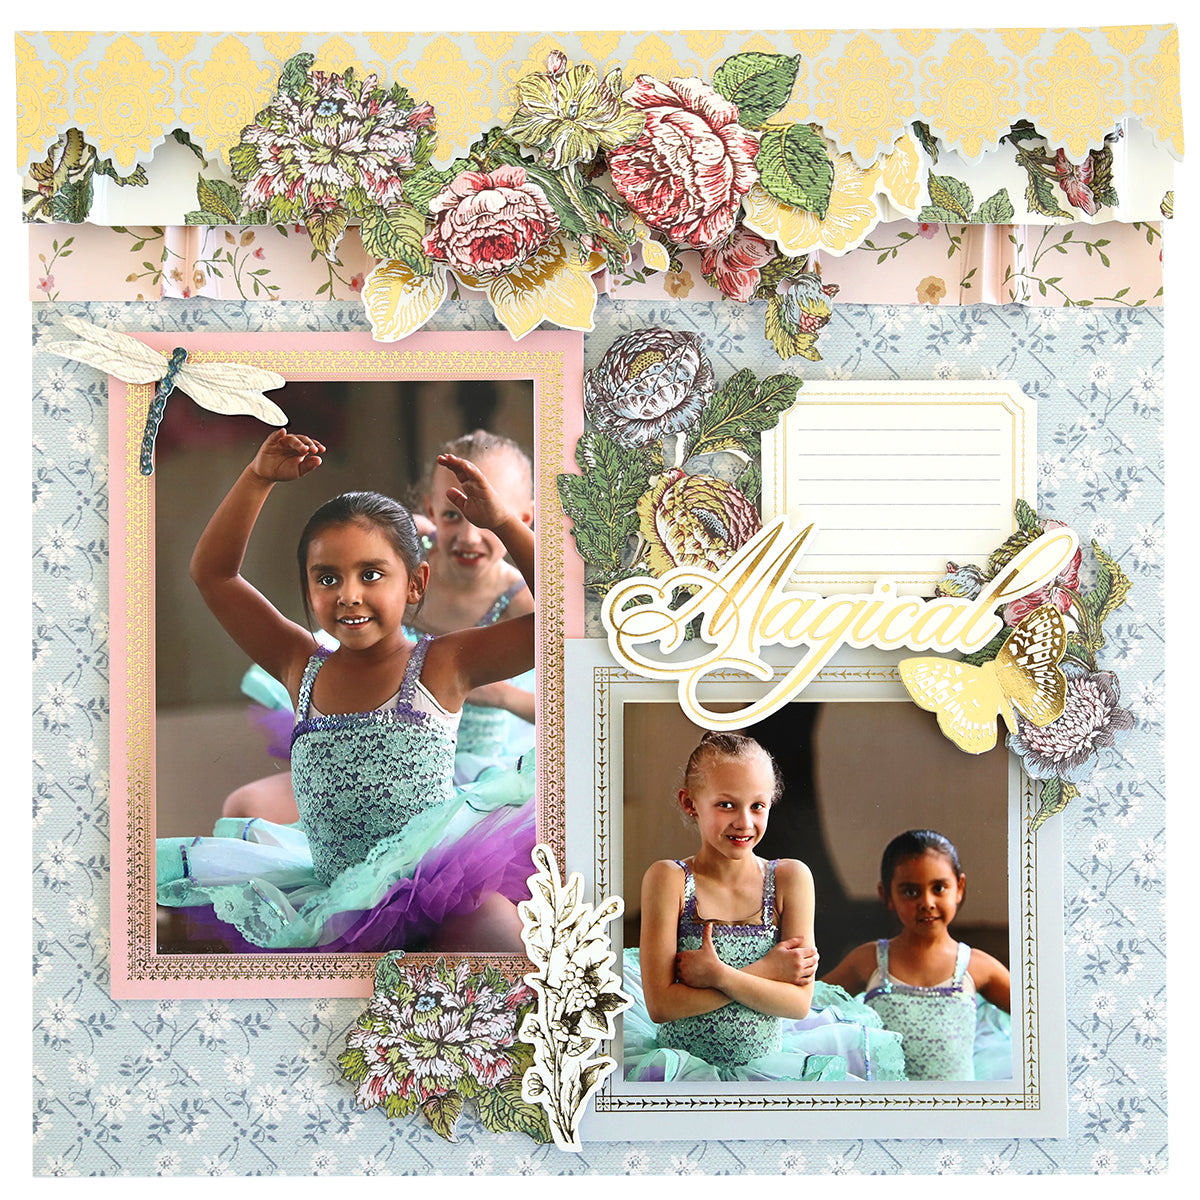 Simply Wildflower Meadow Scrapbook Kit album page featuring two young girls in ballet outfits with floral decorations and the word "magical